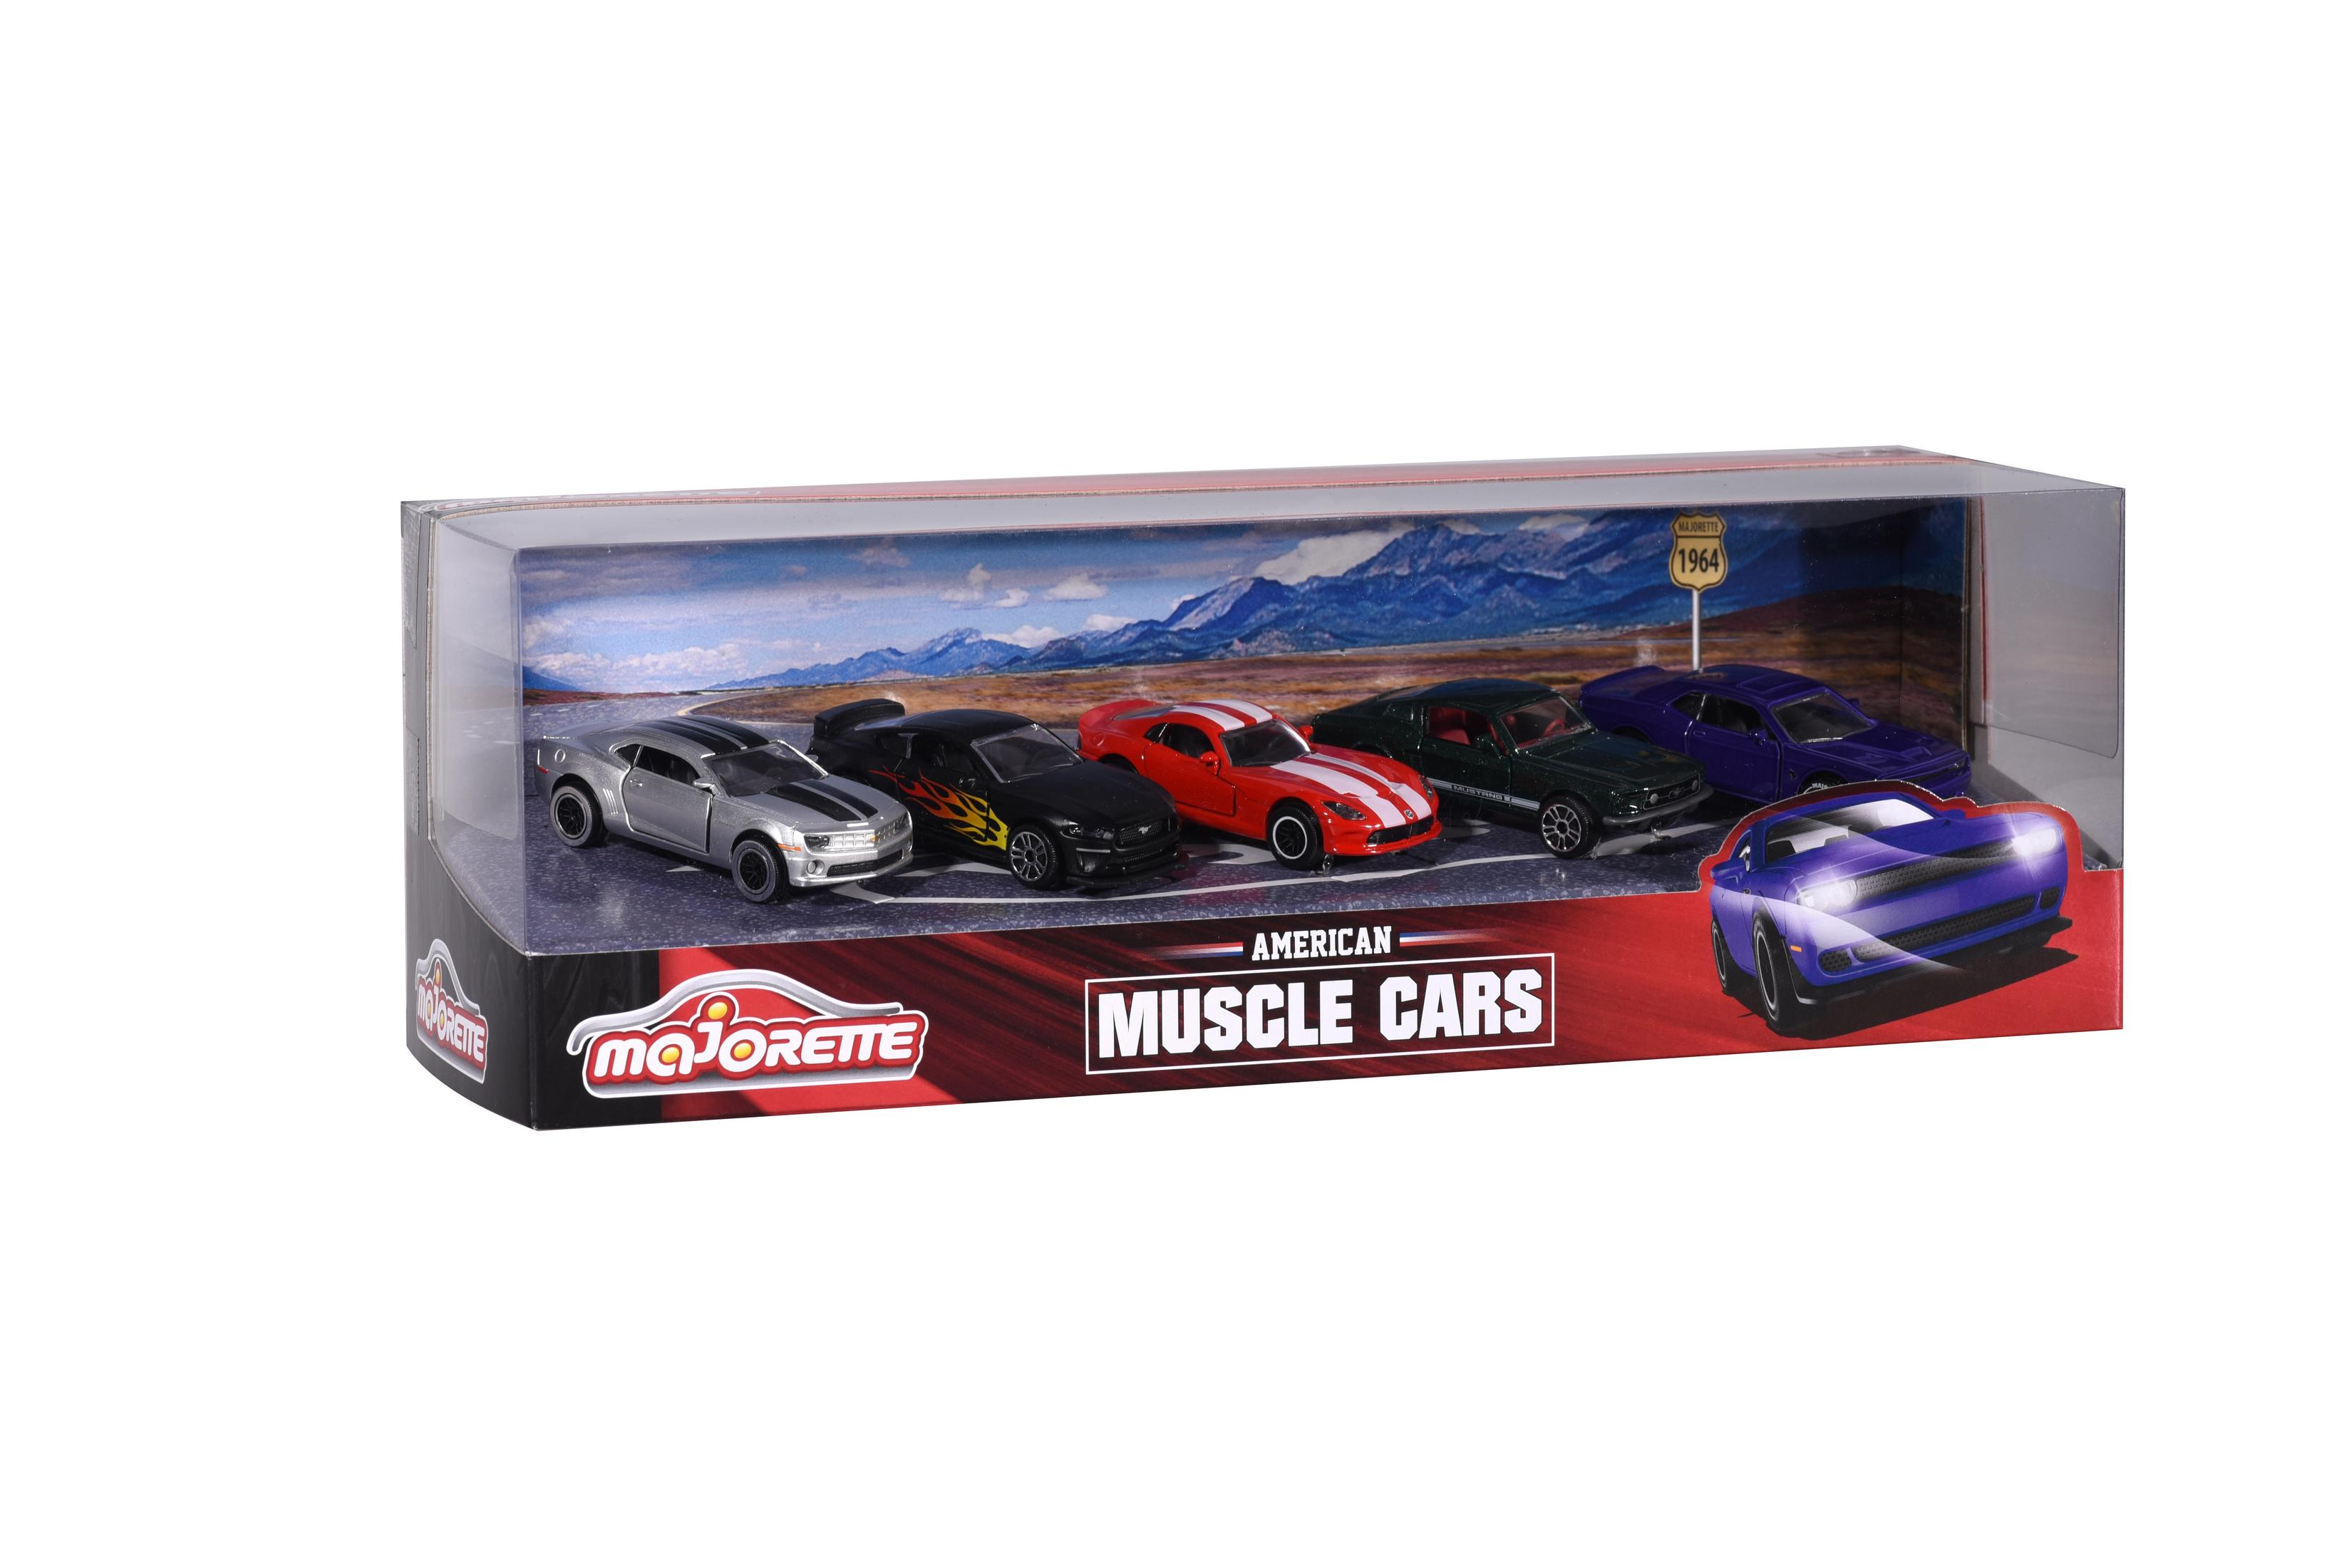 MAJORETTE 212053168 5 Spielzeugauto GIFTPACK PCS CARS MUSCLE Mehrfarbig